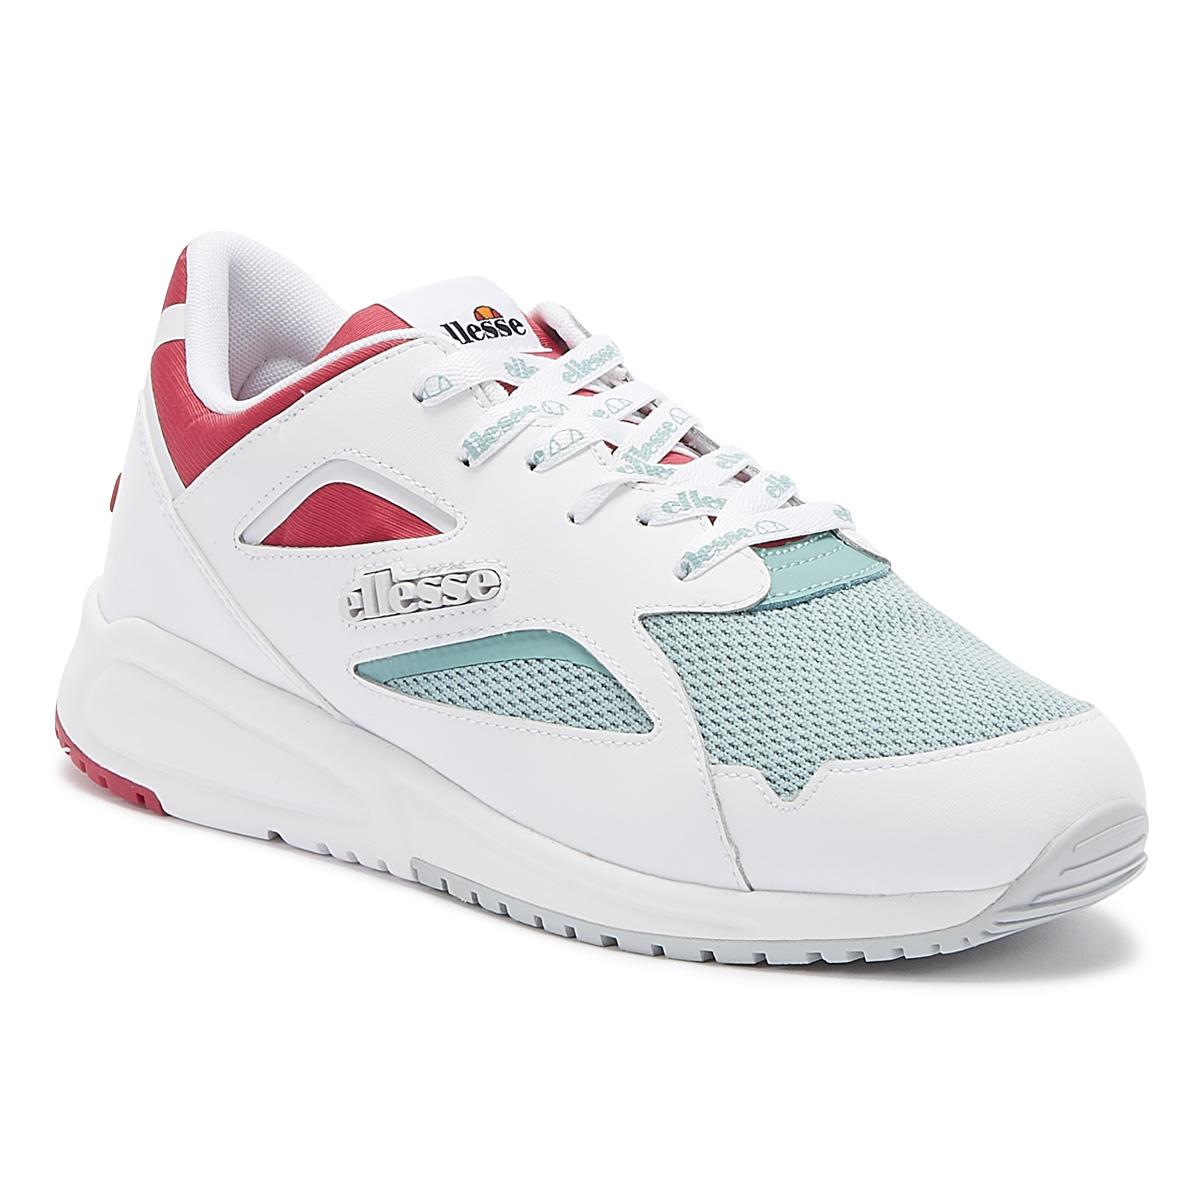 Ellesse Contest Womens White / Turquoise / Pink Leather Trainers - Lyst